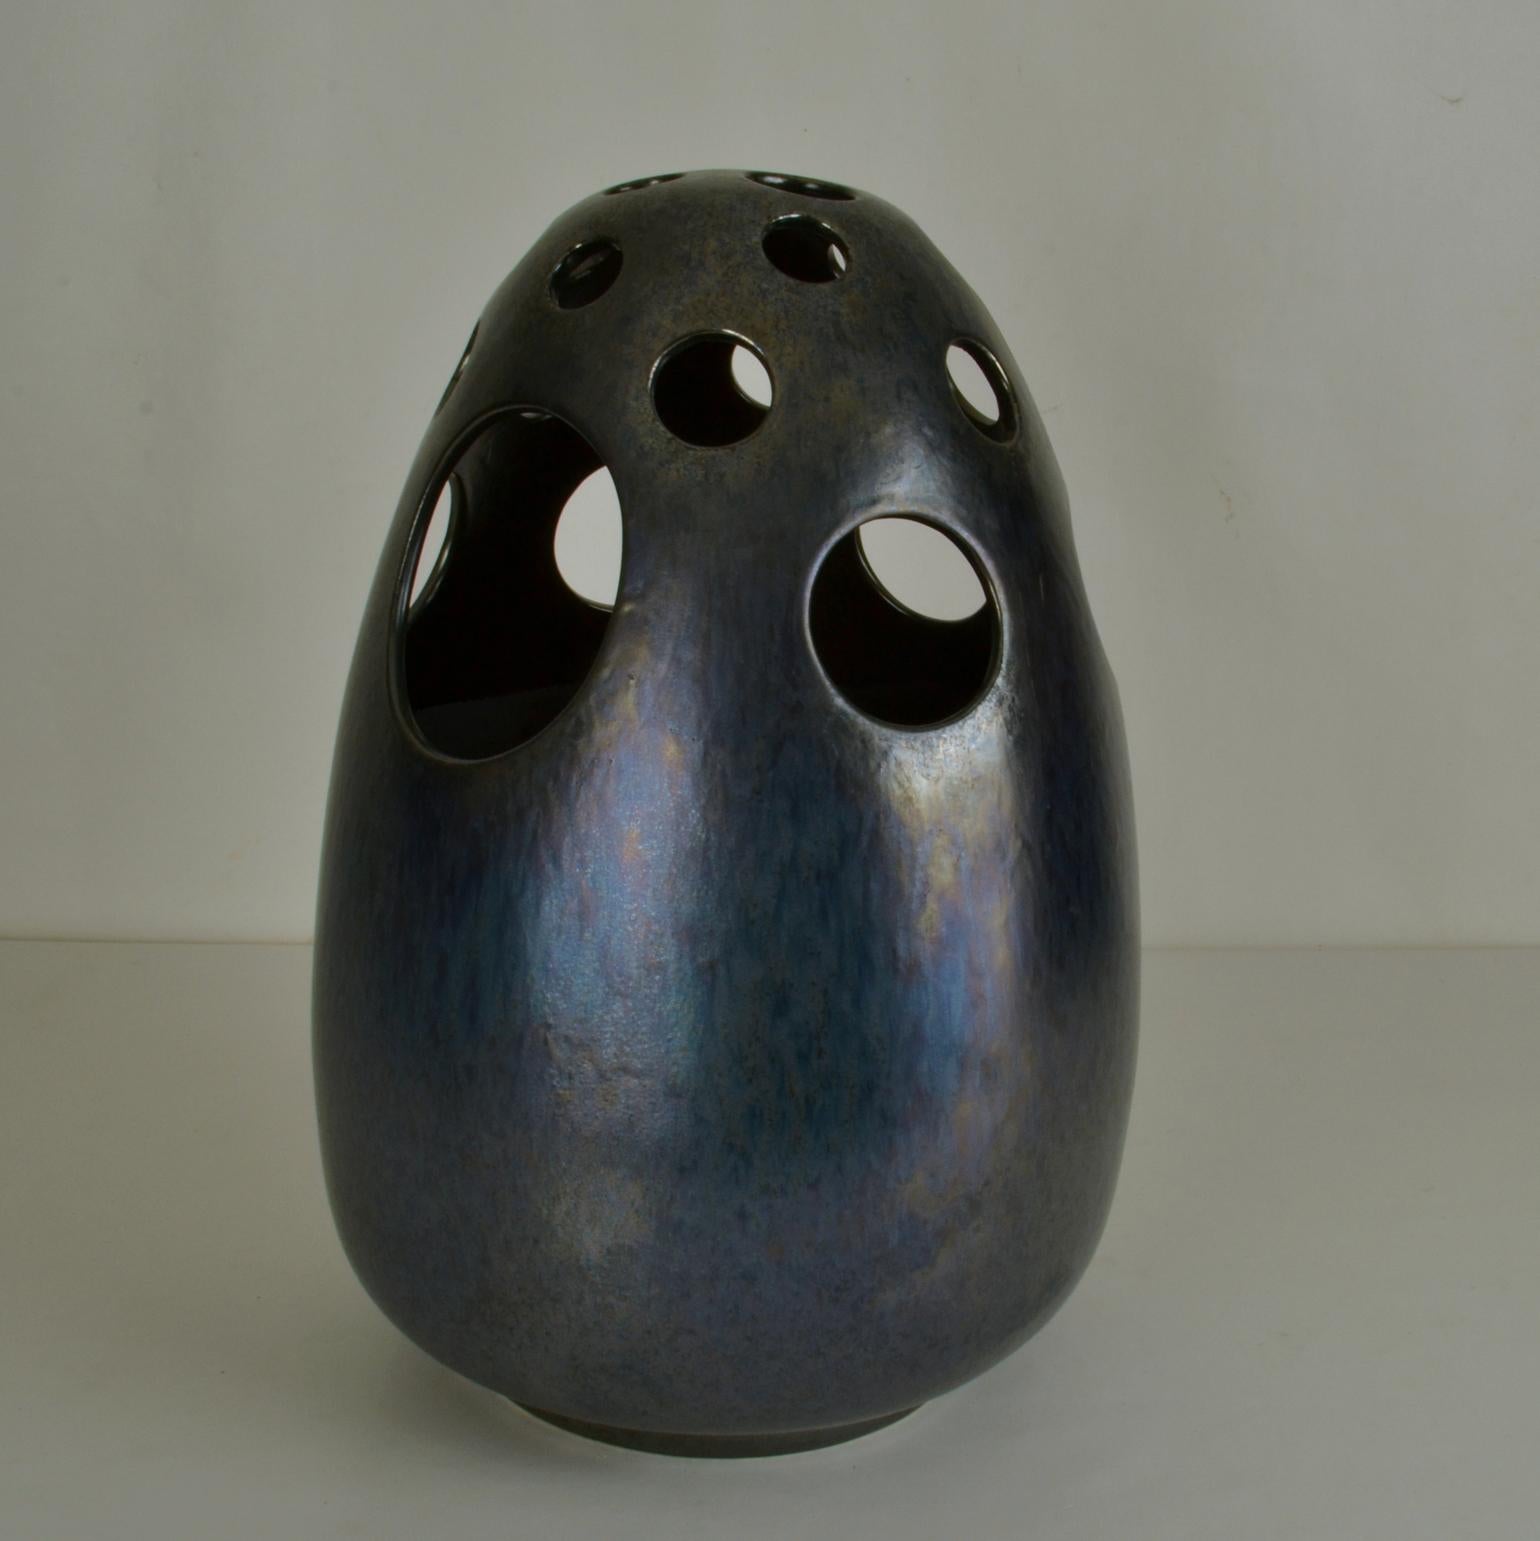 Large decorative vases are sculpted into an egg form. They are perforated with holes cover at the the top of the vessels alternating into a series of medium to large holes almost half way down the vase. Over the surface the glaze is applied ranging